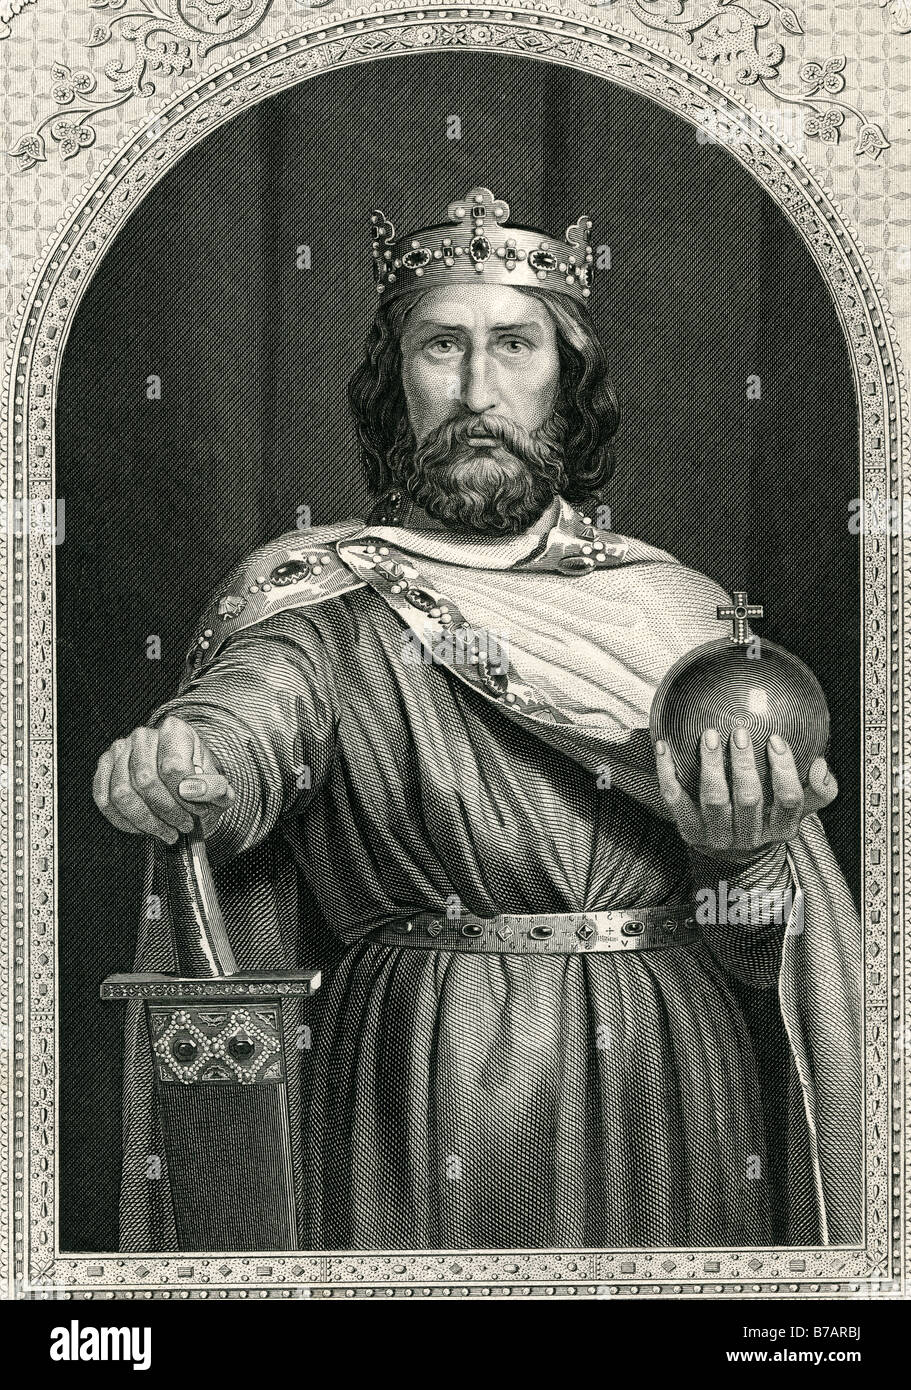 Charlemagne  Carolus Magnus or Karolus Magnus, meaning Charles the Great (2 April 742 – 28 January 814) was King of the Franks f Stock Photo